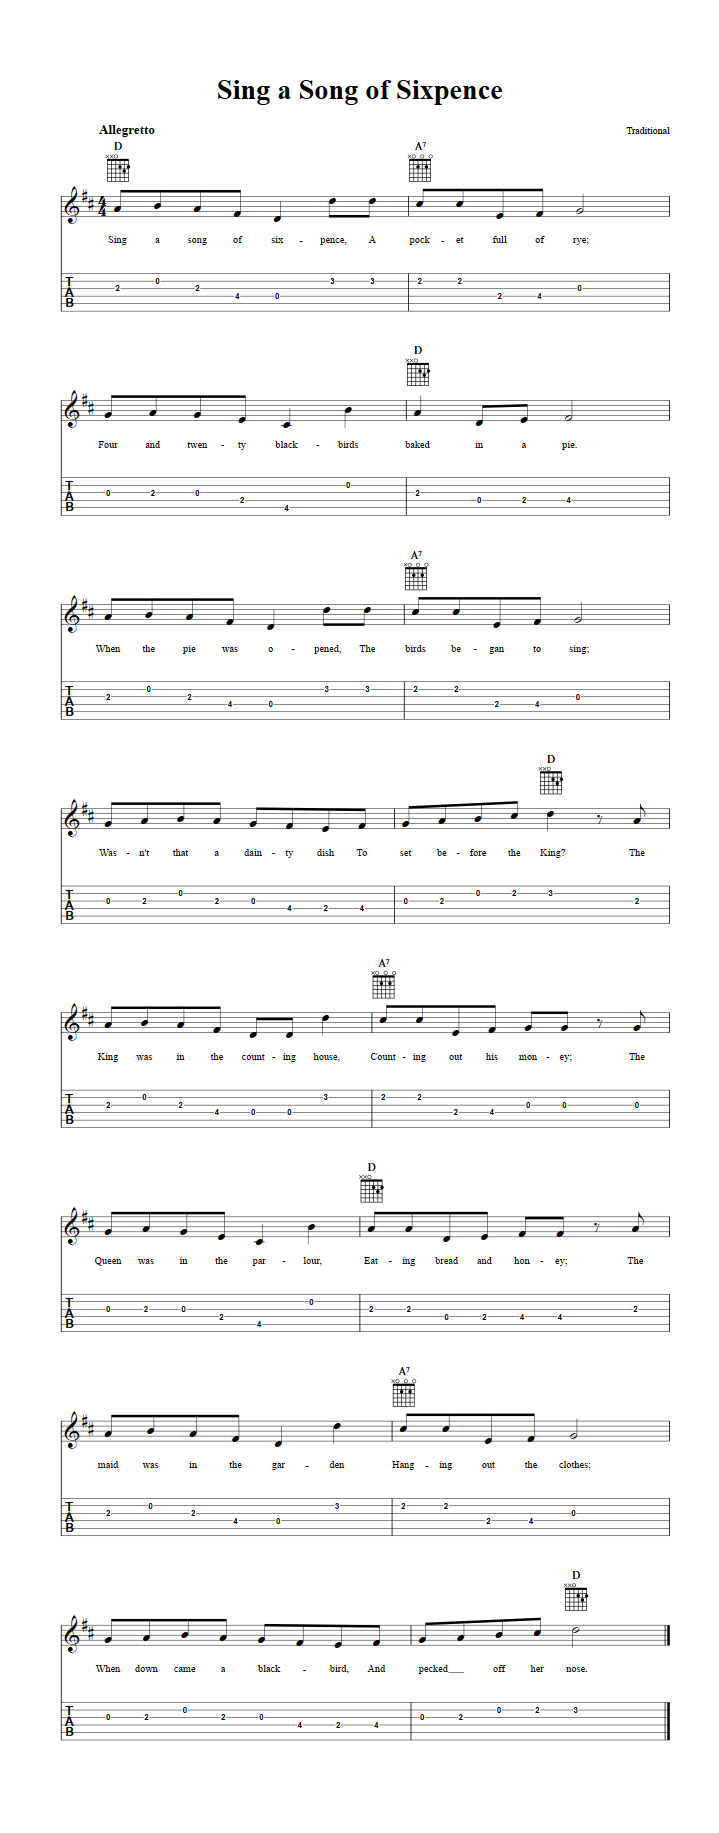 Sing a Song of Sixpence Guitar Tab